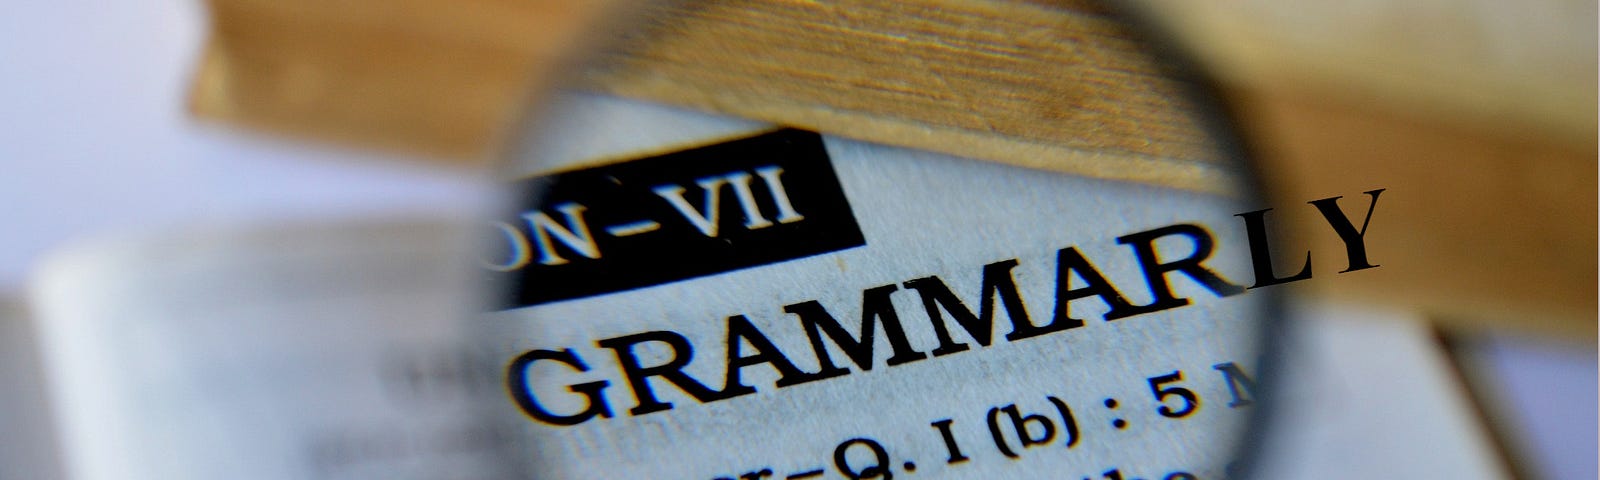 The word ‘GRAMMAR’ is shown via a magnified glass with a ‘LY’ added next to it by yours truly to form the word ‘GRAMMARLY’.